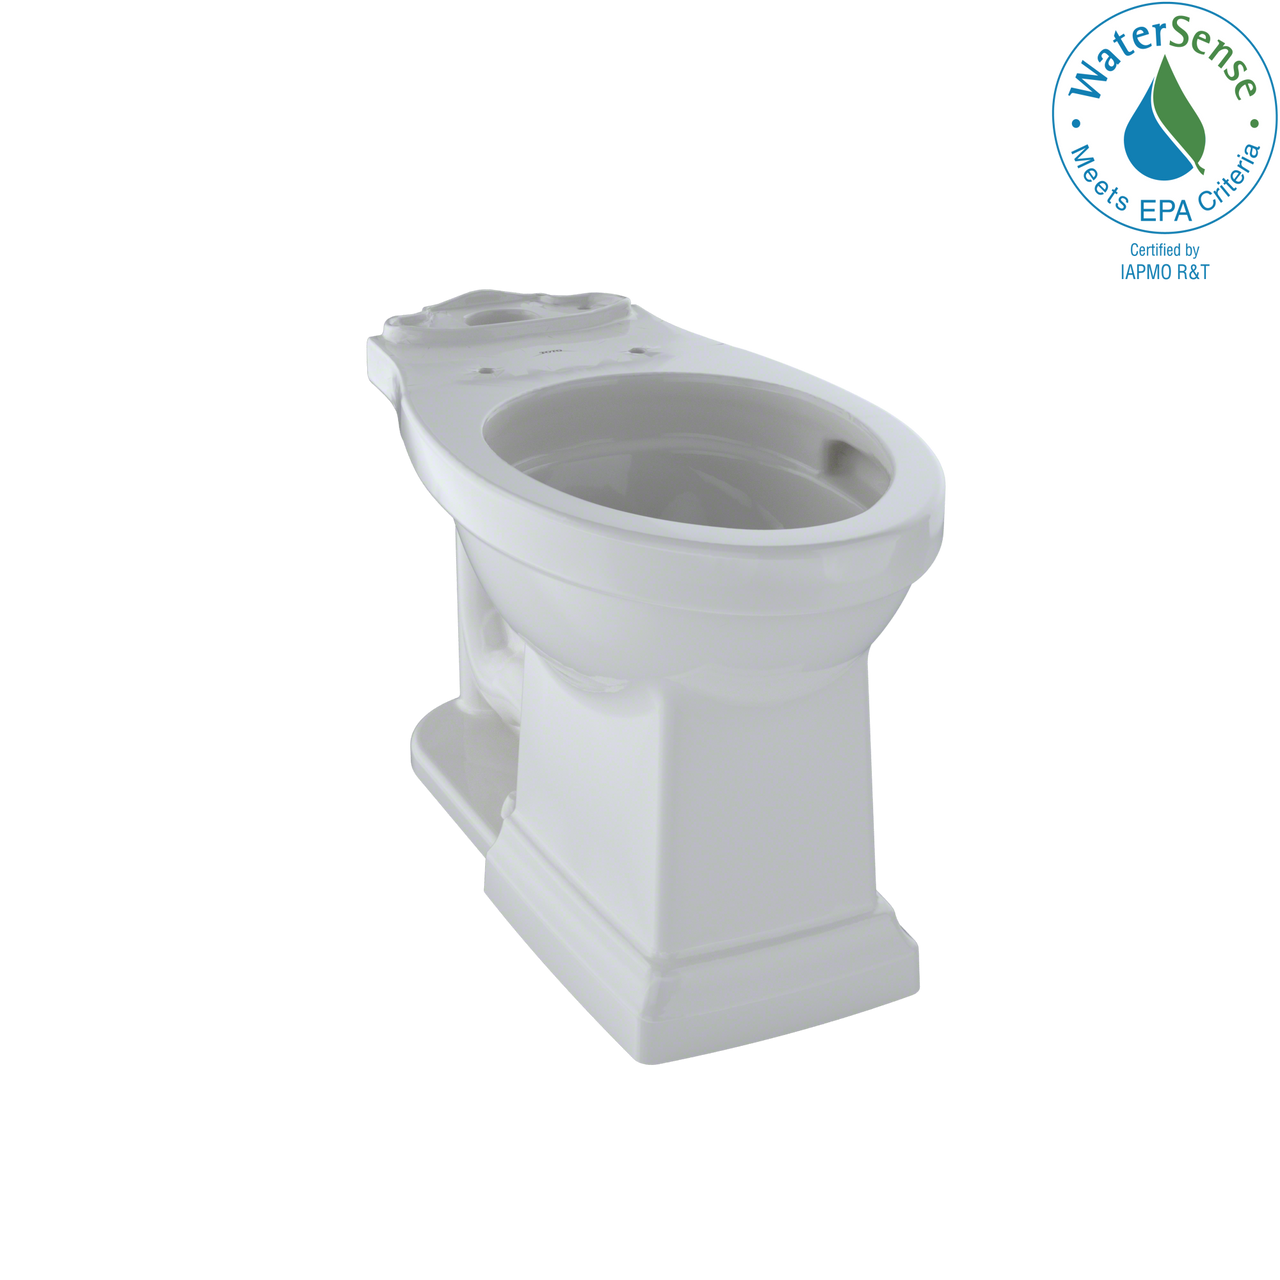 TOTO Promenade II Universal Height Toilet Bowl with CeFiONtect,   - C404CUFG#11 - BNGBath